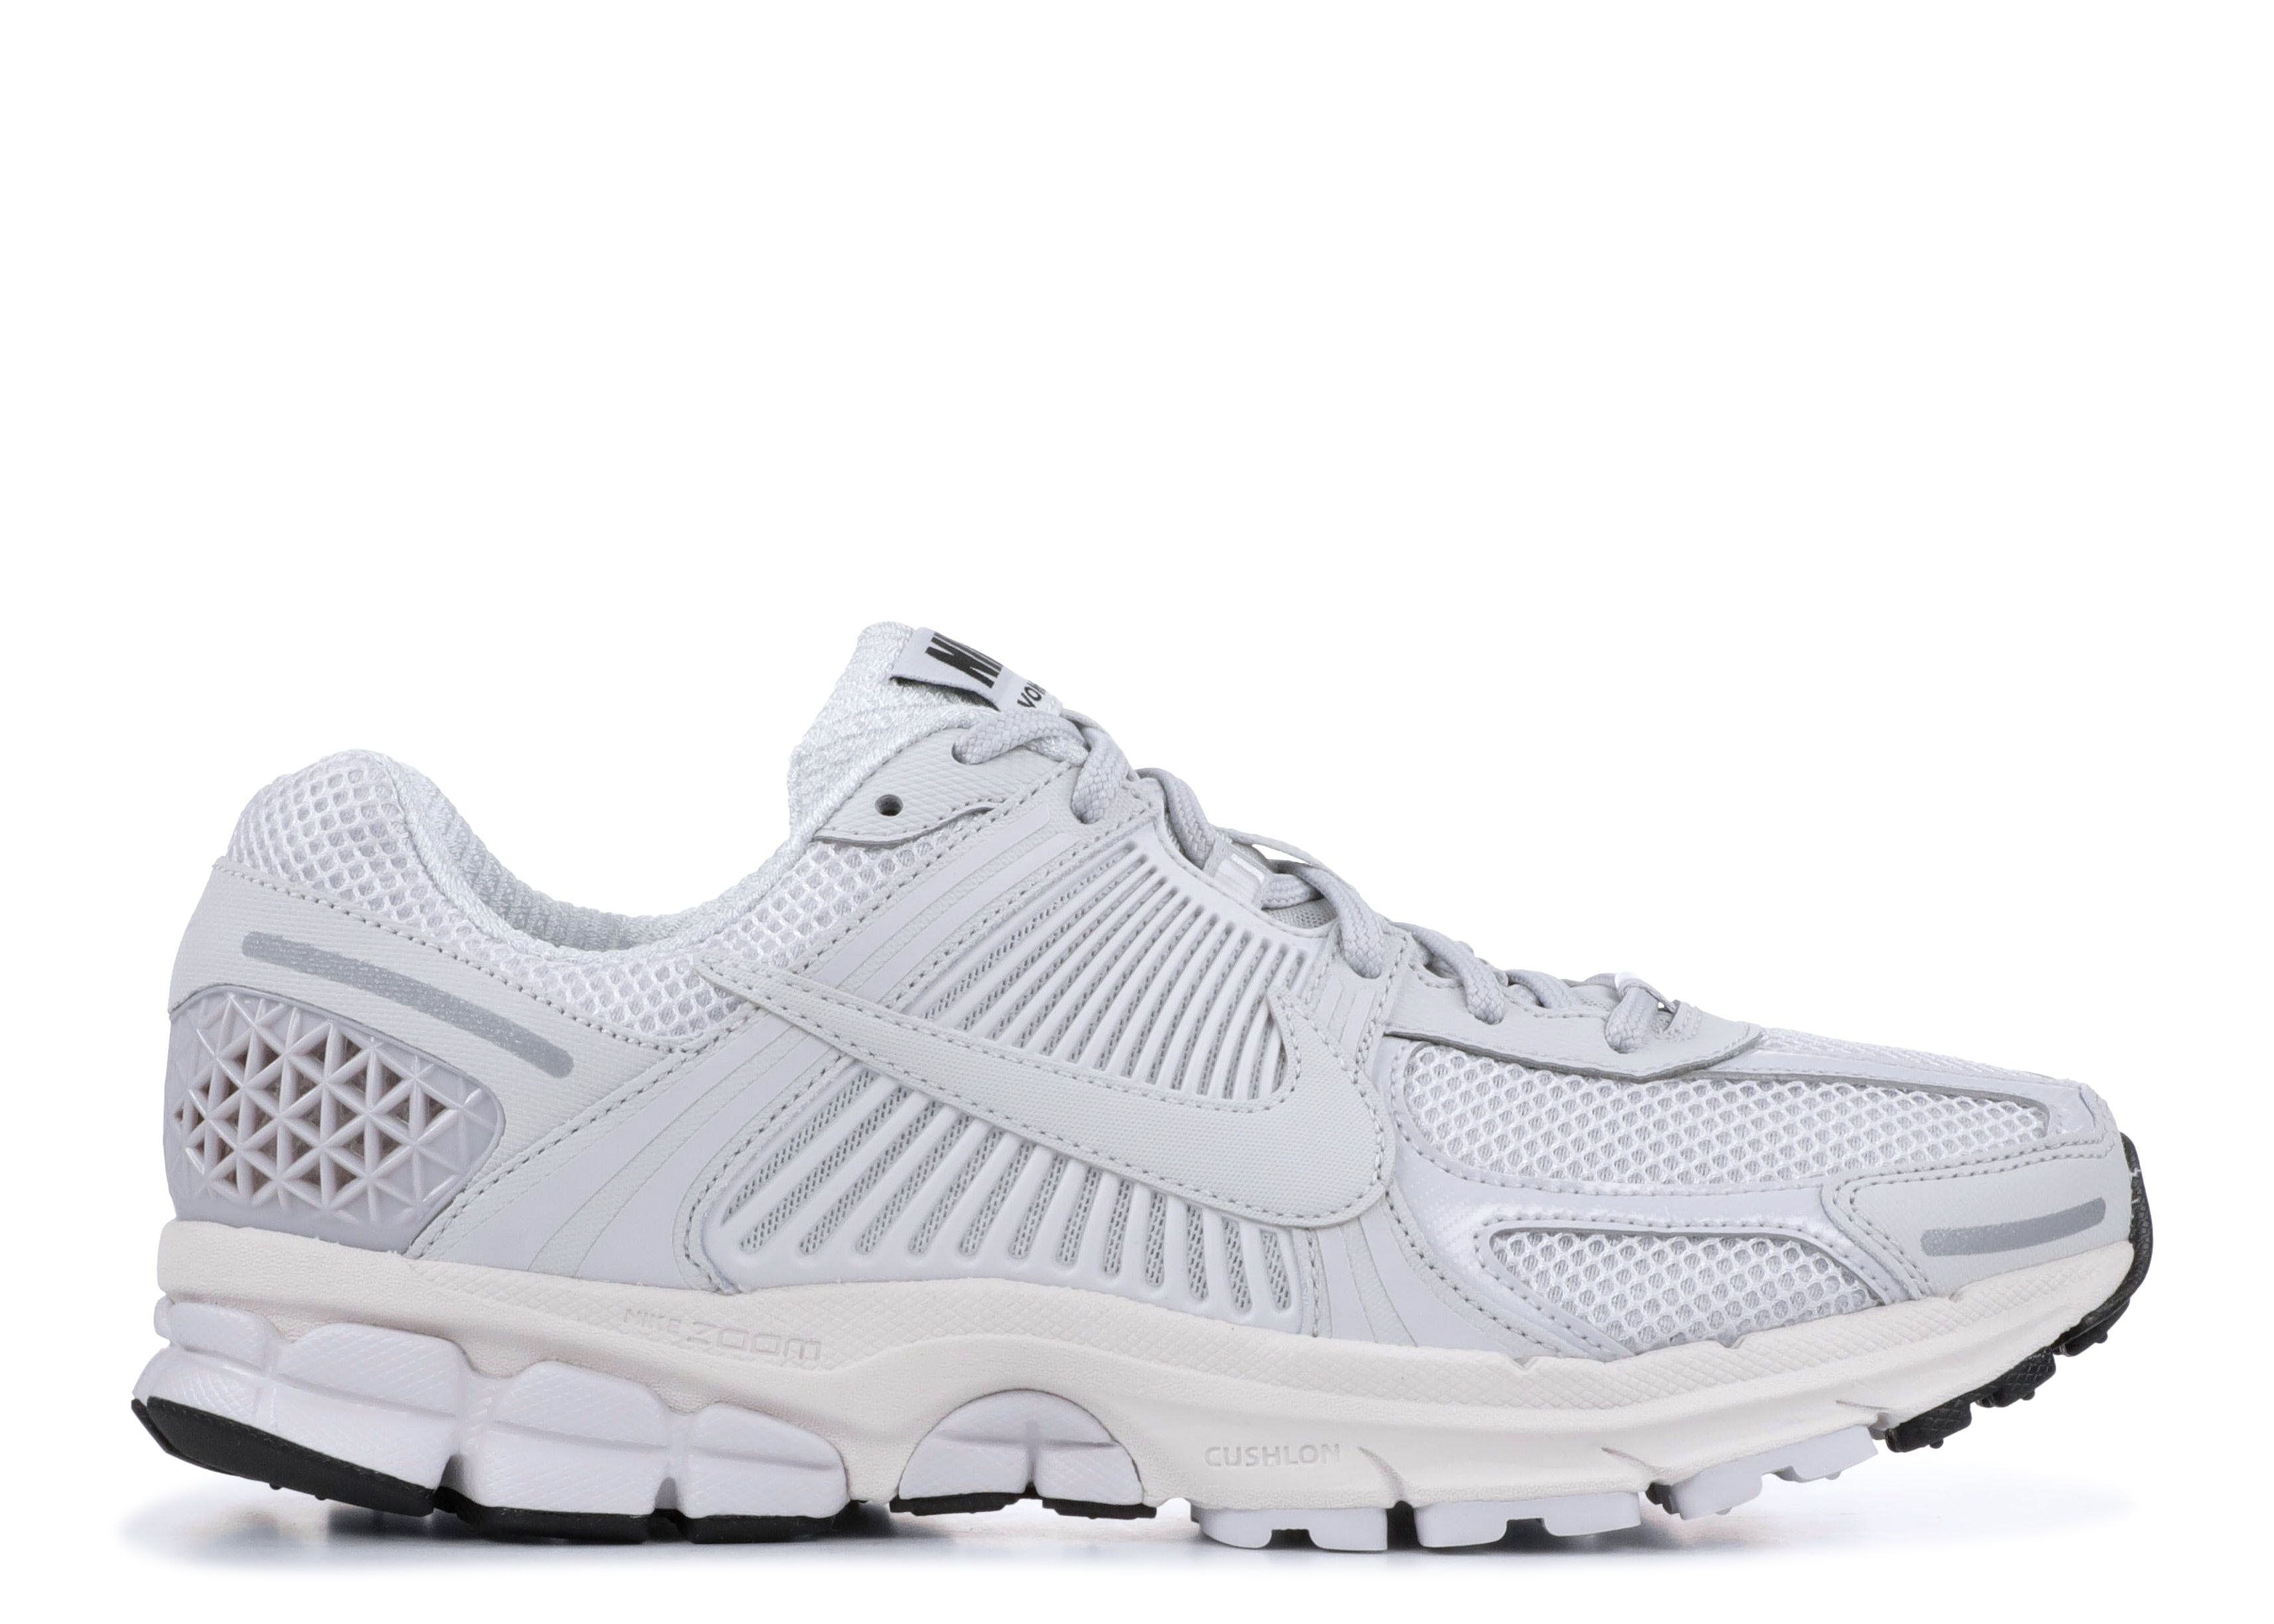 Кроссовки Nike Air Zoom Vomero 5 'Vast Grey' 2019, серый nike original new arrival 2018 air zoom vomero 12 men s running shoes breathable outdoor sneakers 863762 001